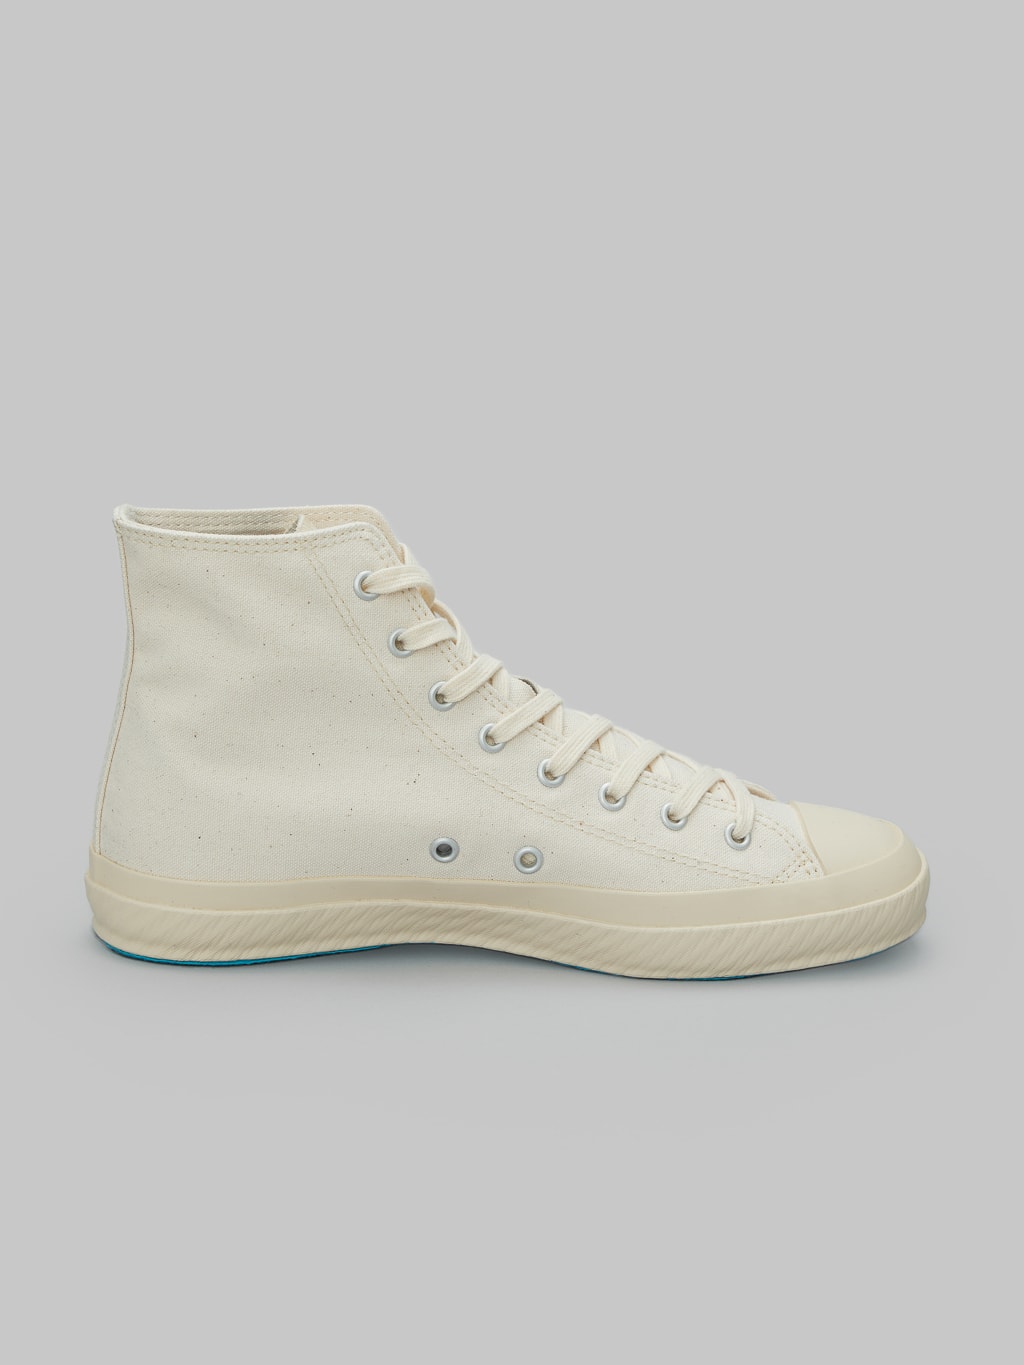 Shoes like pottery high sneaker white ventilation side holes